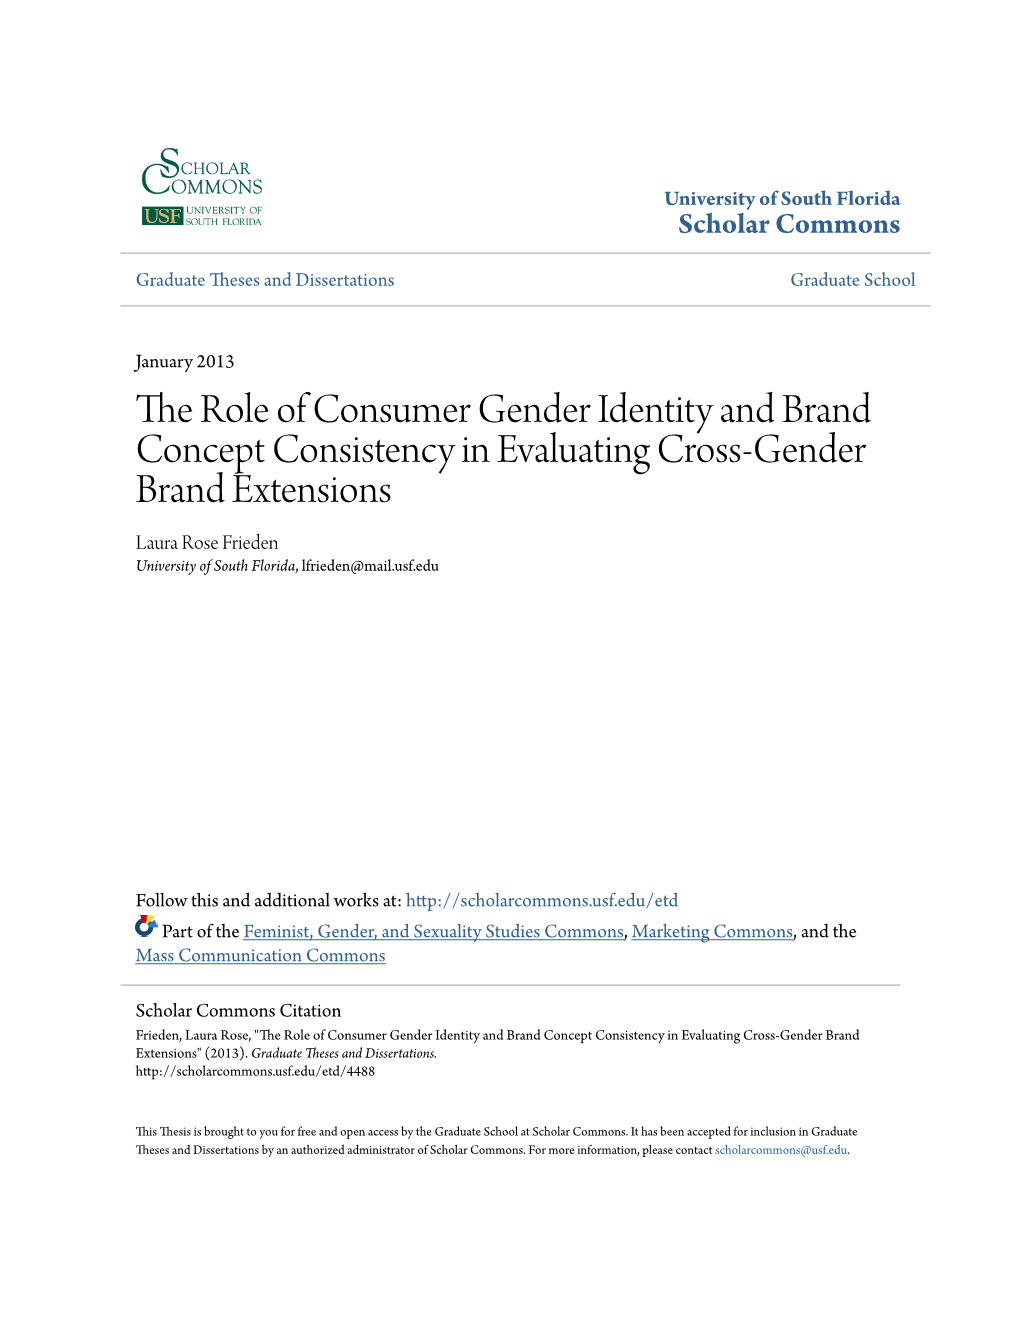 The Role of Consumer Gender Identity and Brand Concept Consistency In